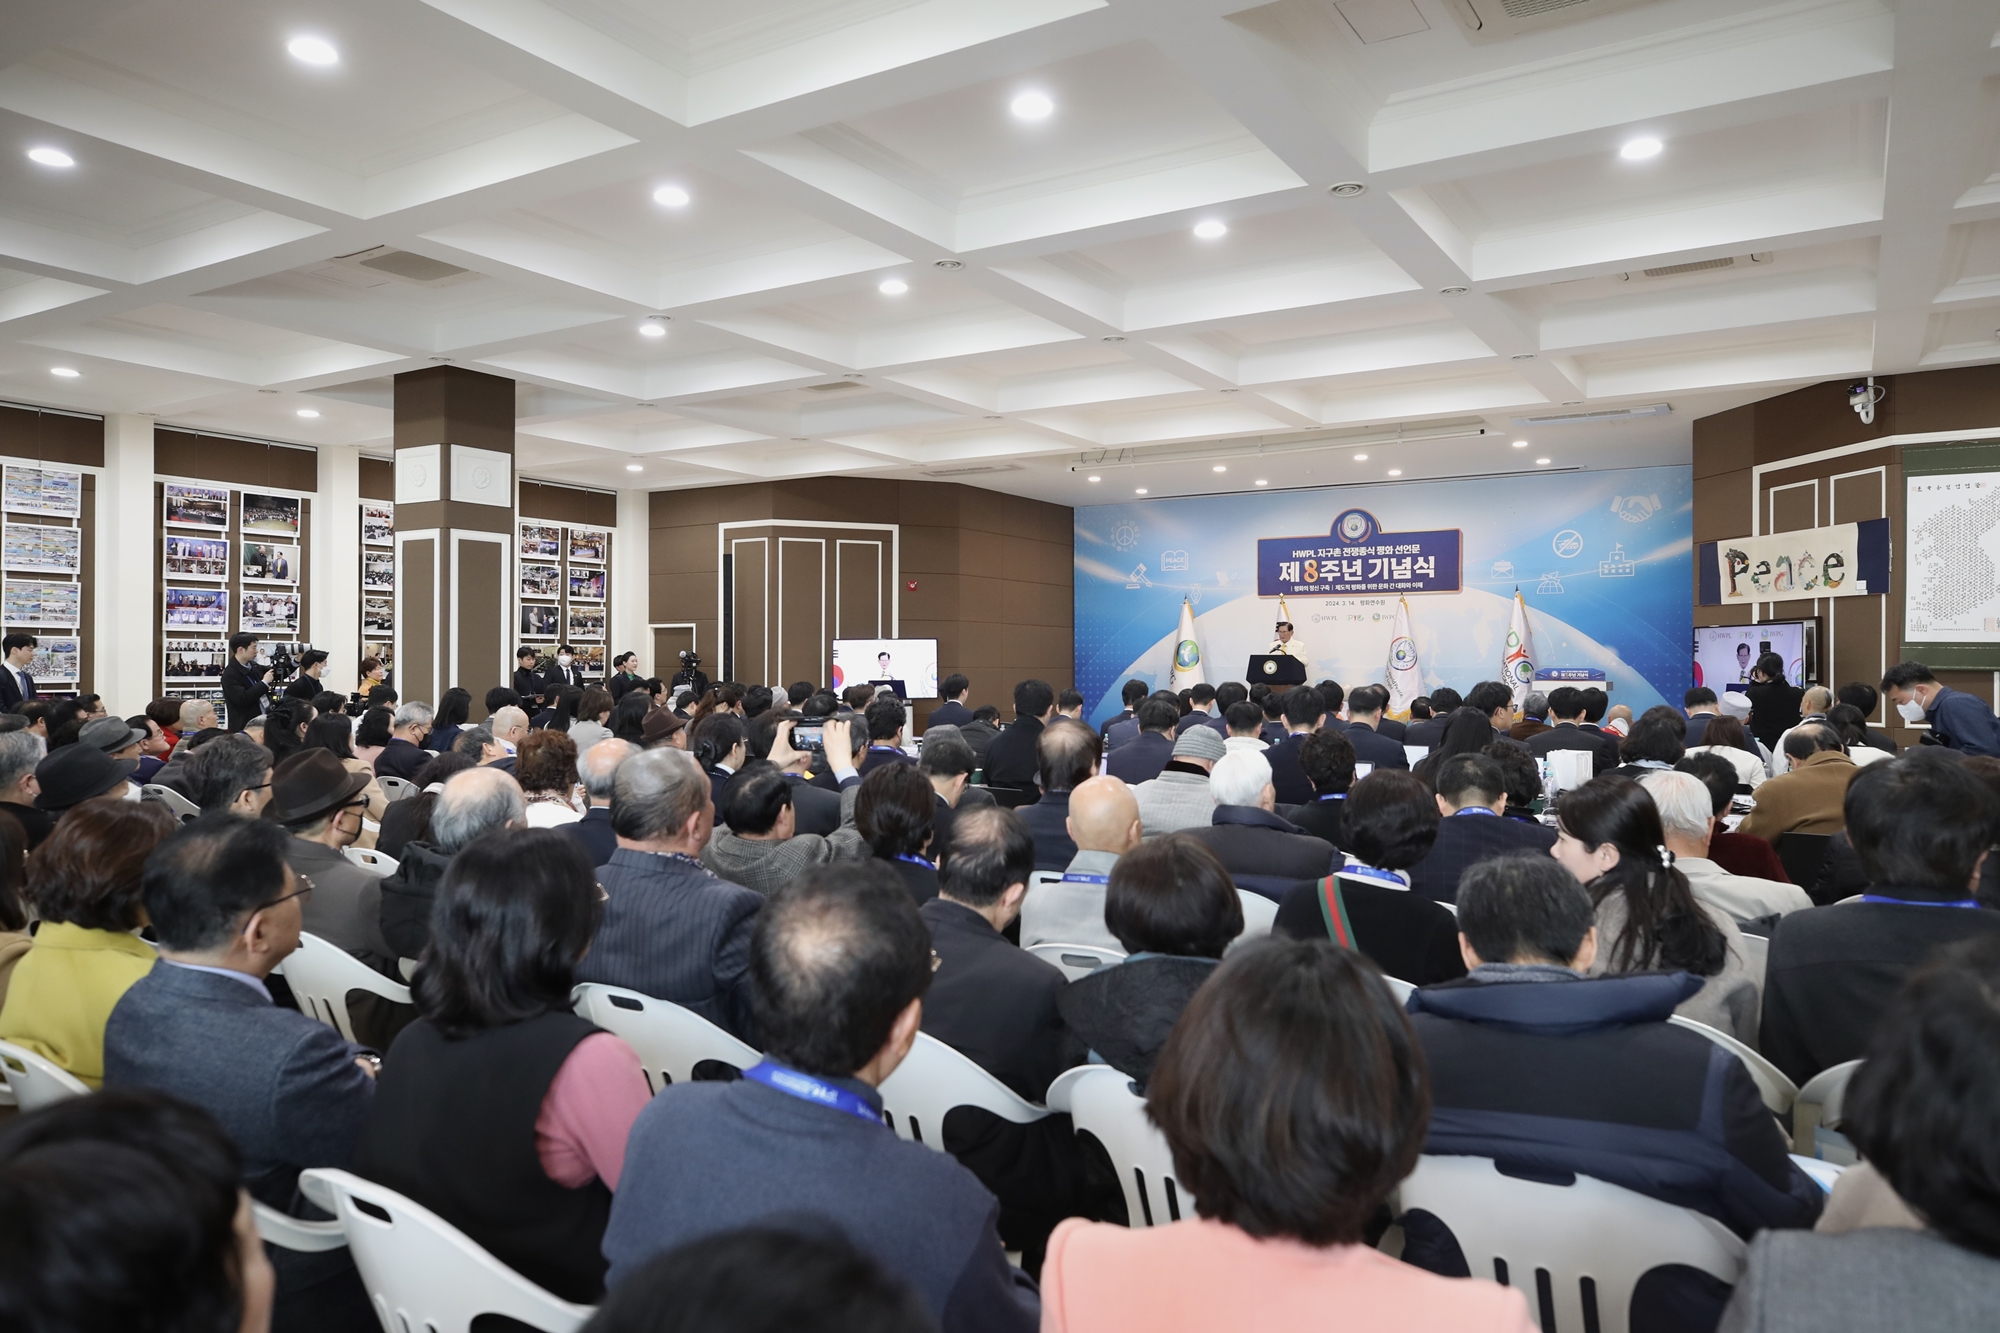 The 8thanniversary ceremony of the HWPL Declaration of Peace Cessation of War